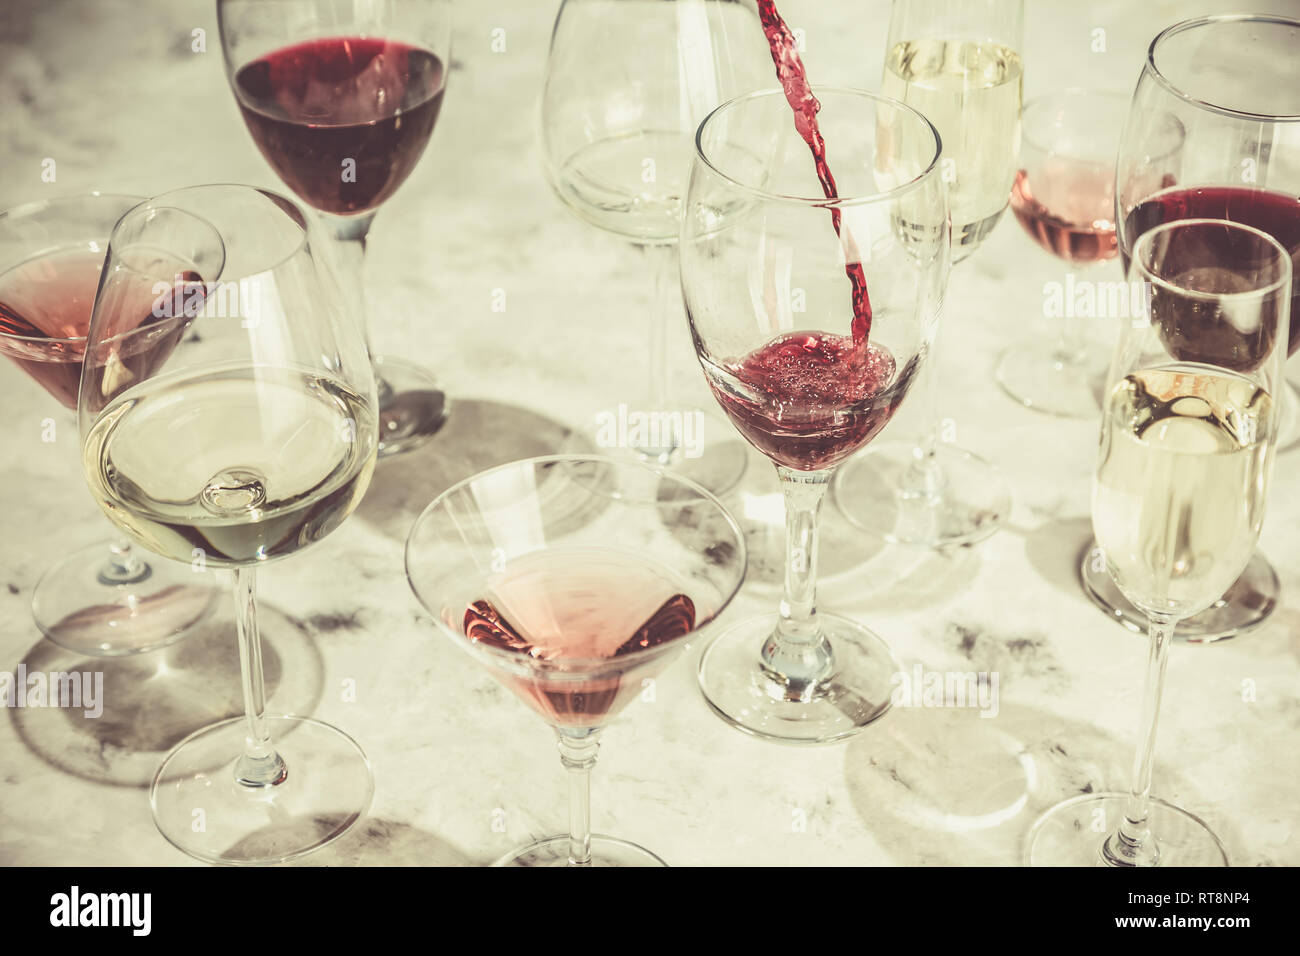 Wine tasting concept - glass with different wine on marble background Stock Photo